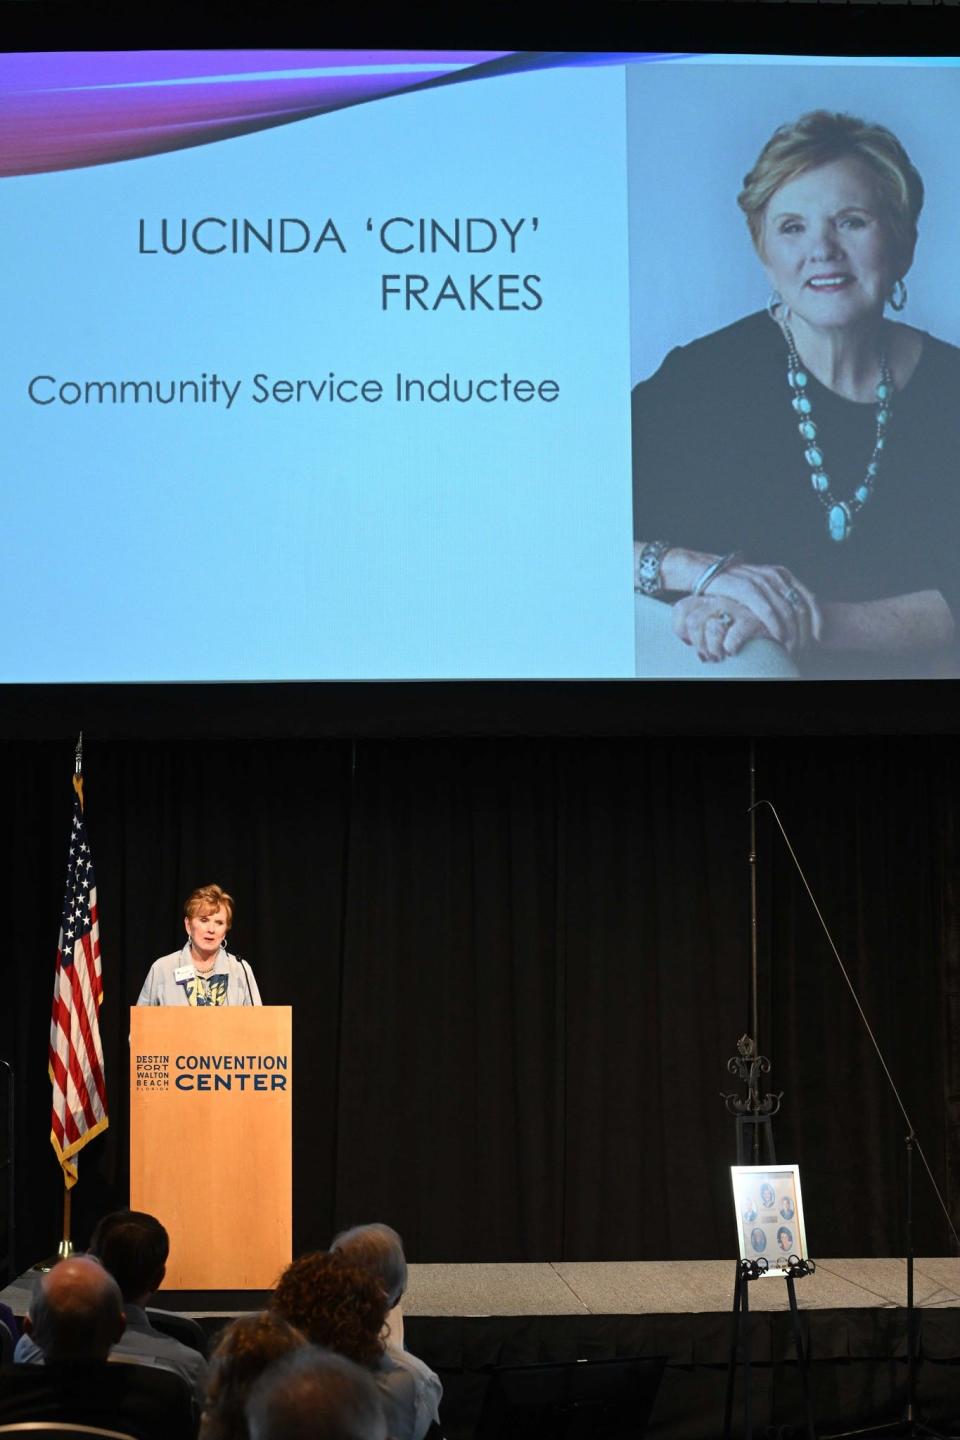 Cindy Frakes was the Community Service inductee. A longtime real estate agent and advocate for women.